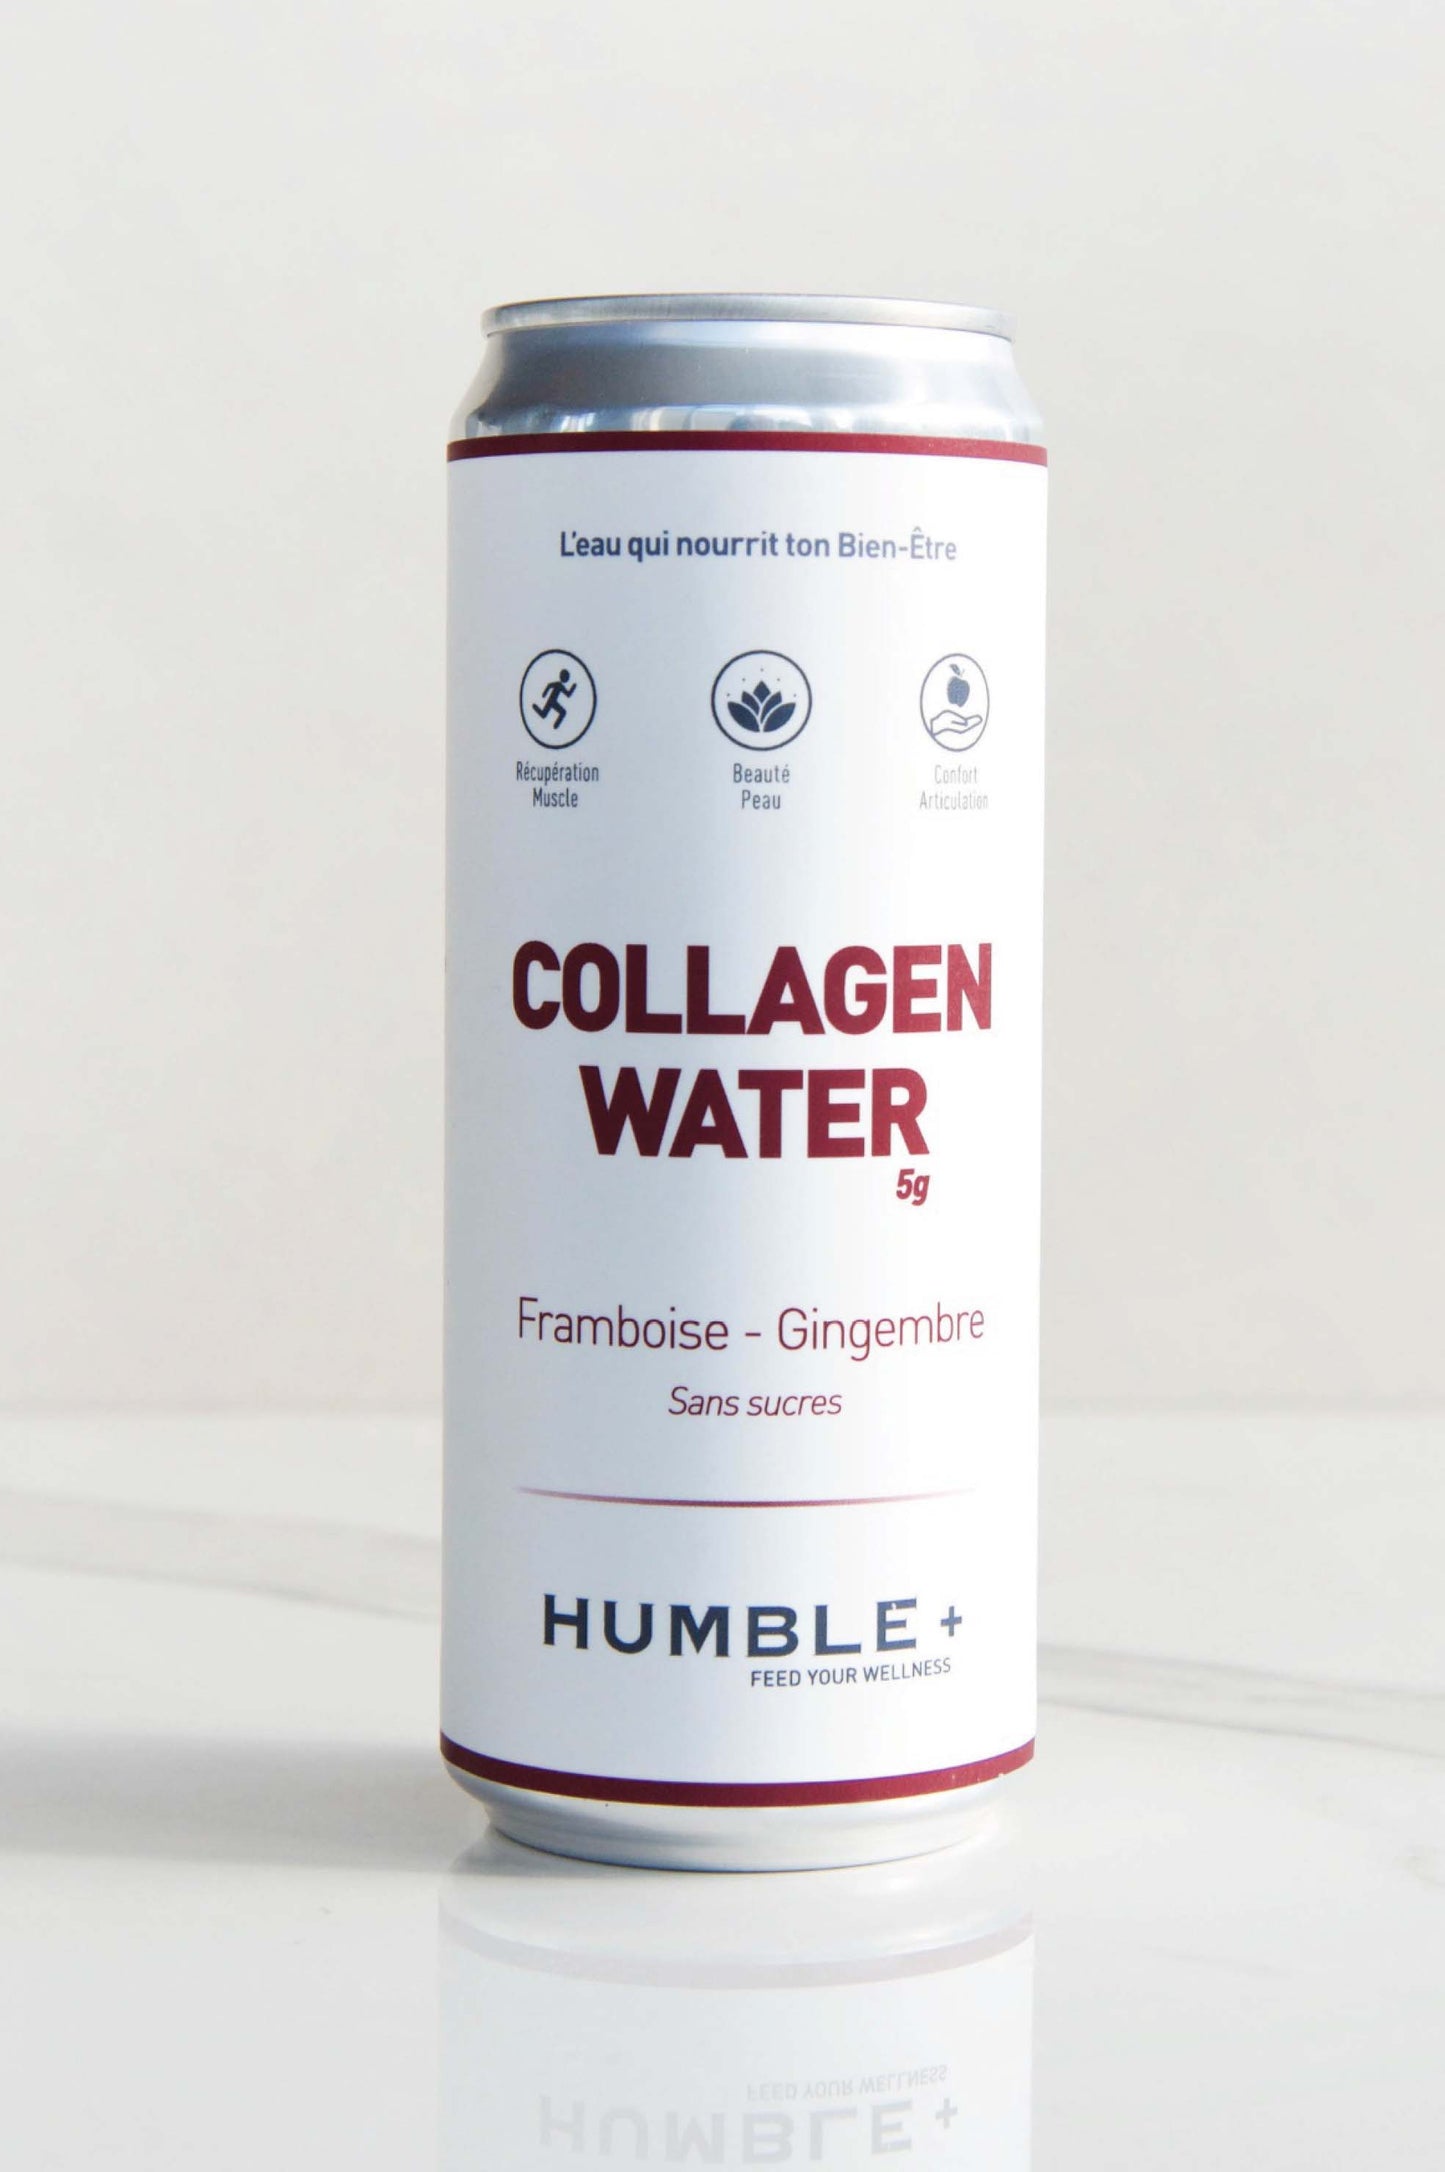 Humble+ Framboise, Gingembre